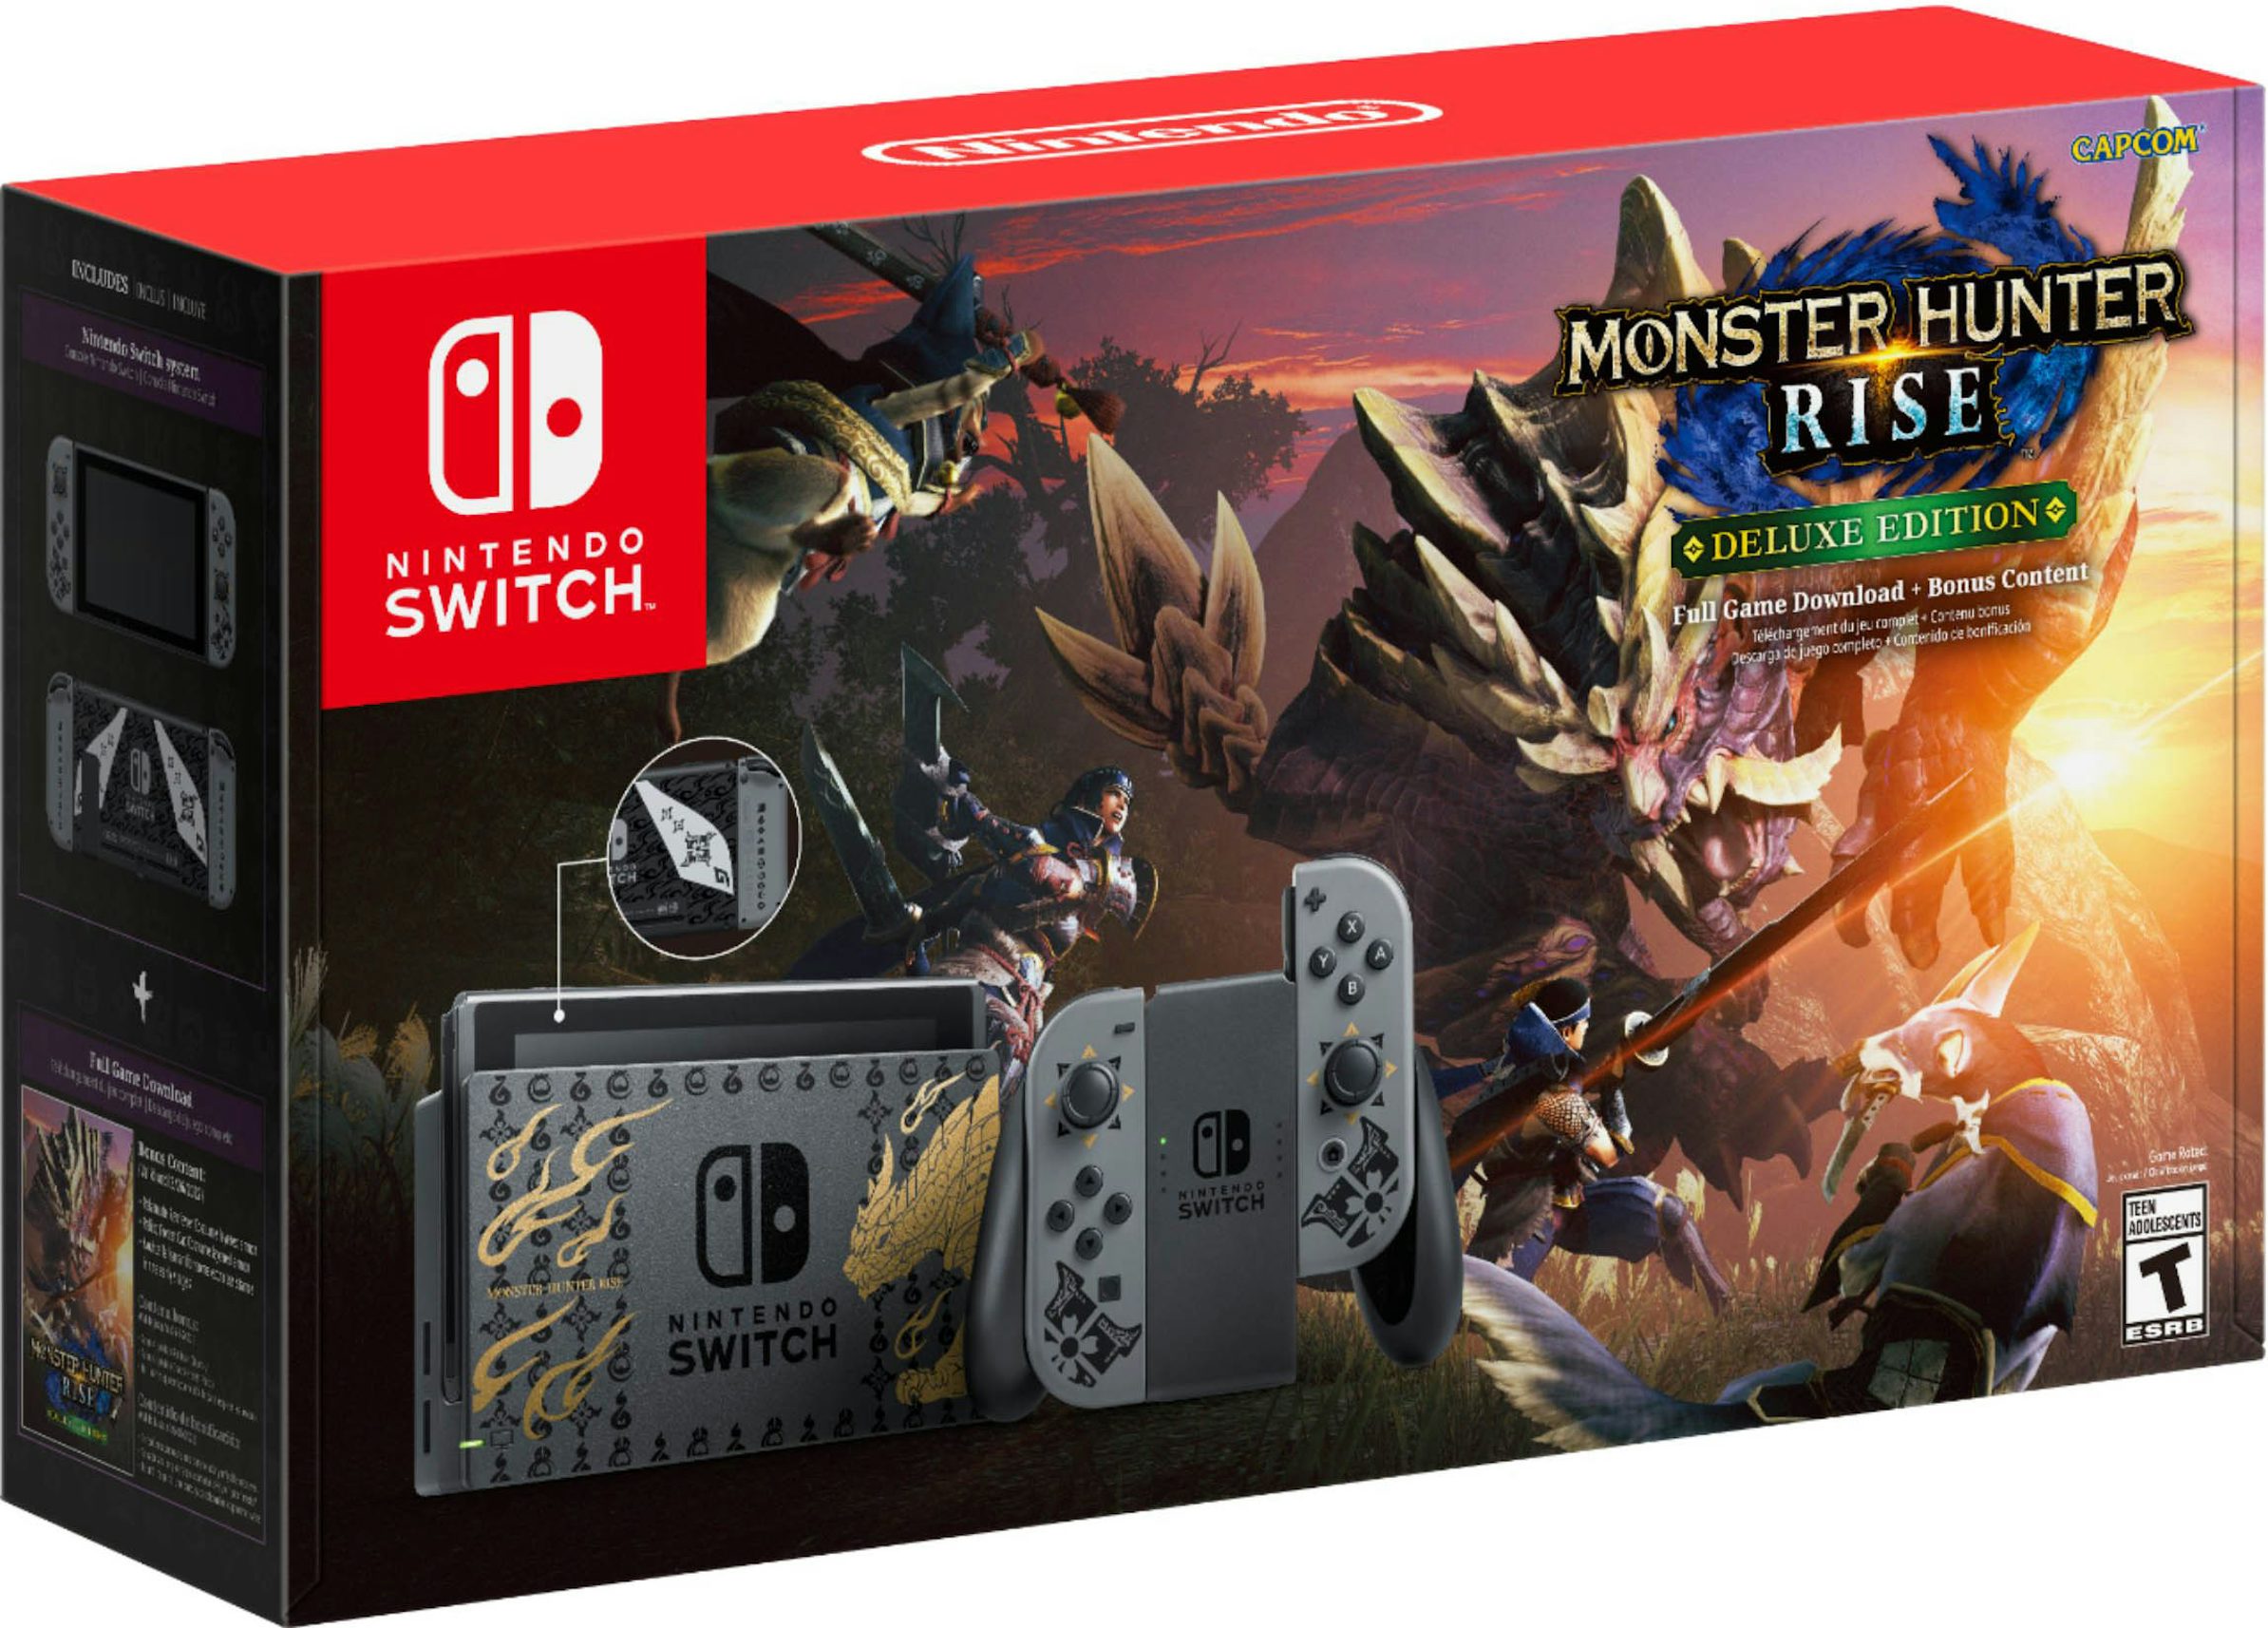 Nintendo Switch Monster Hunter Rise Deluxe Edition US - System HADSKGALG Grey